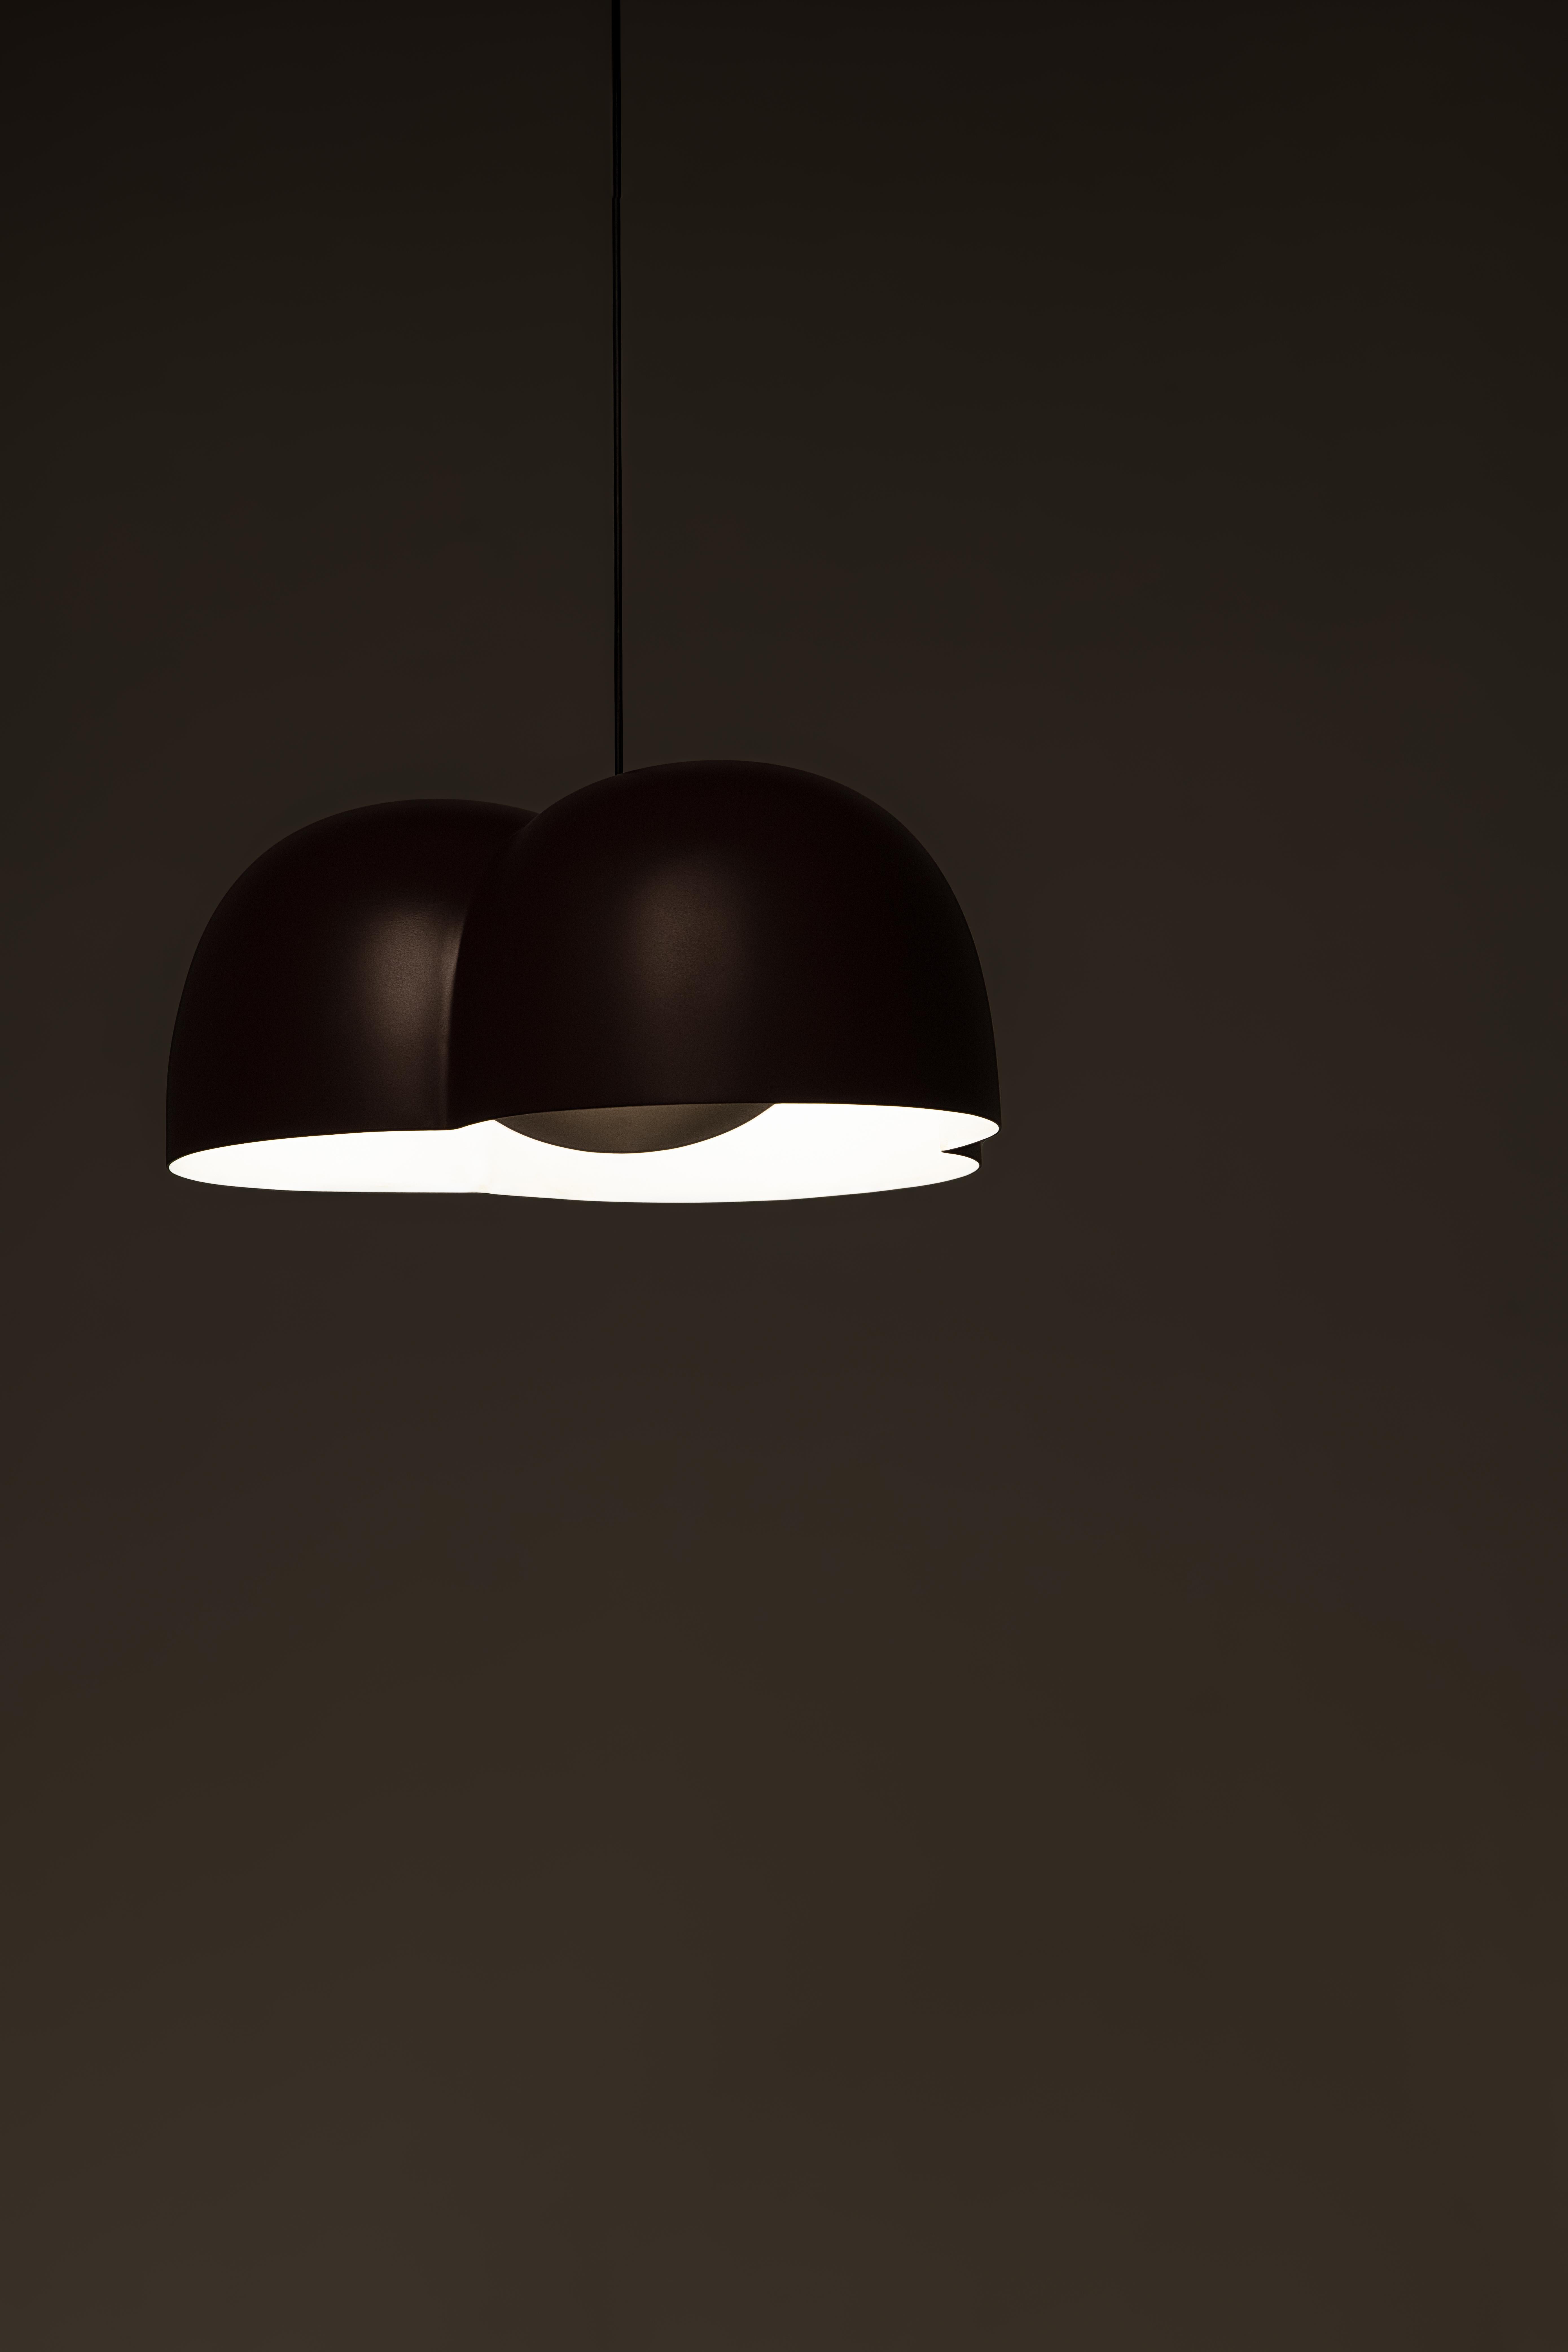 Korean Contemporary Pendant Lamp 'Cotton' by AGO, Small, Chocolate  For Sale